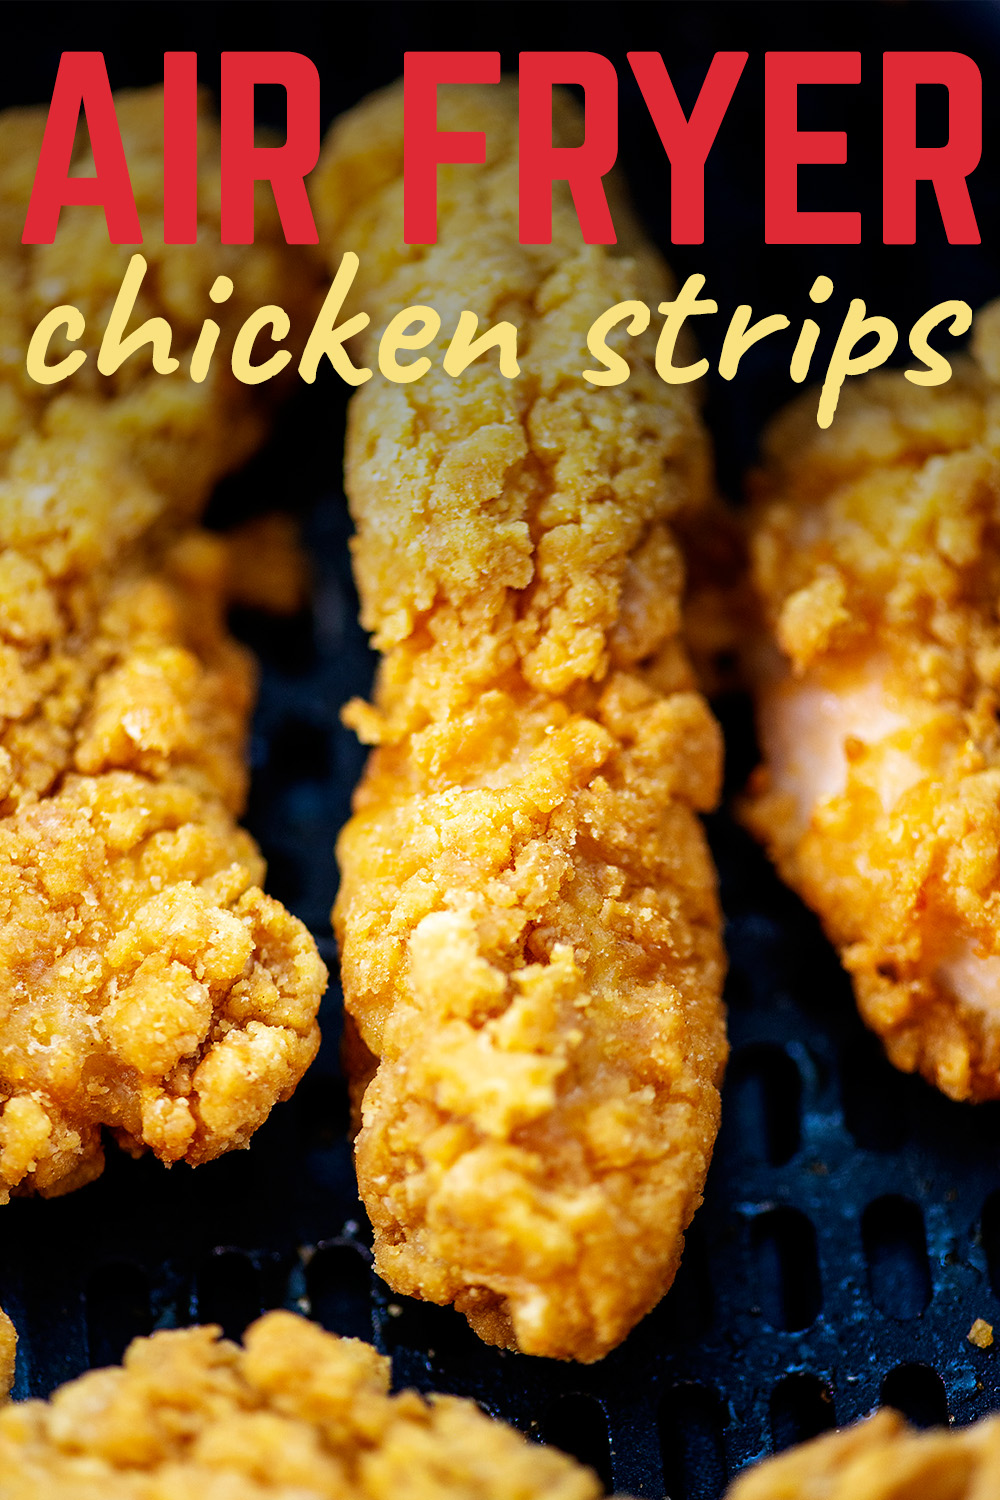 Look at how crispy these air fryer chicken strips are!  They are so easy to go from the freezer, straight to the air fryer, and onto your plate!